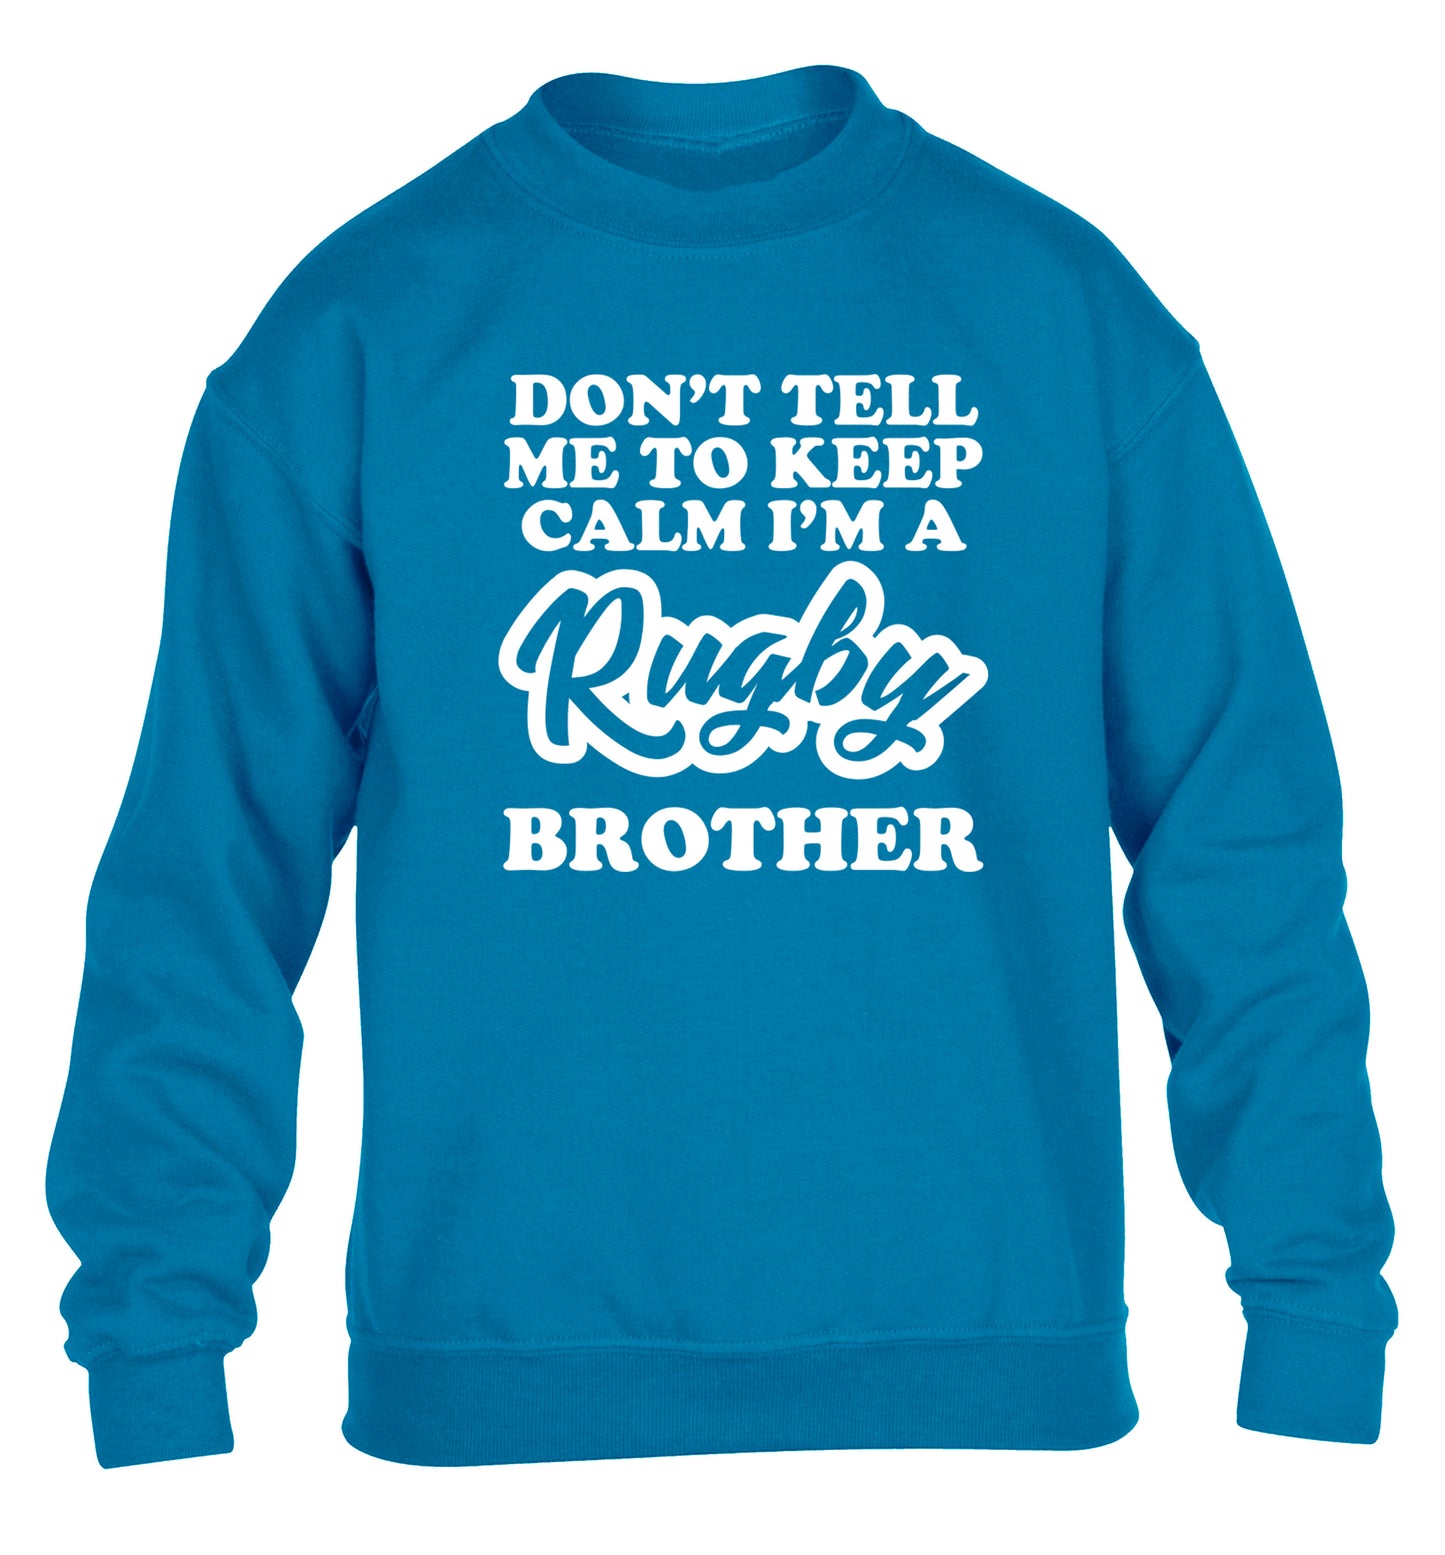 Don't tell me keep calm I'm a rugby brother children's blue sweater 12-13 Years